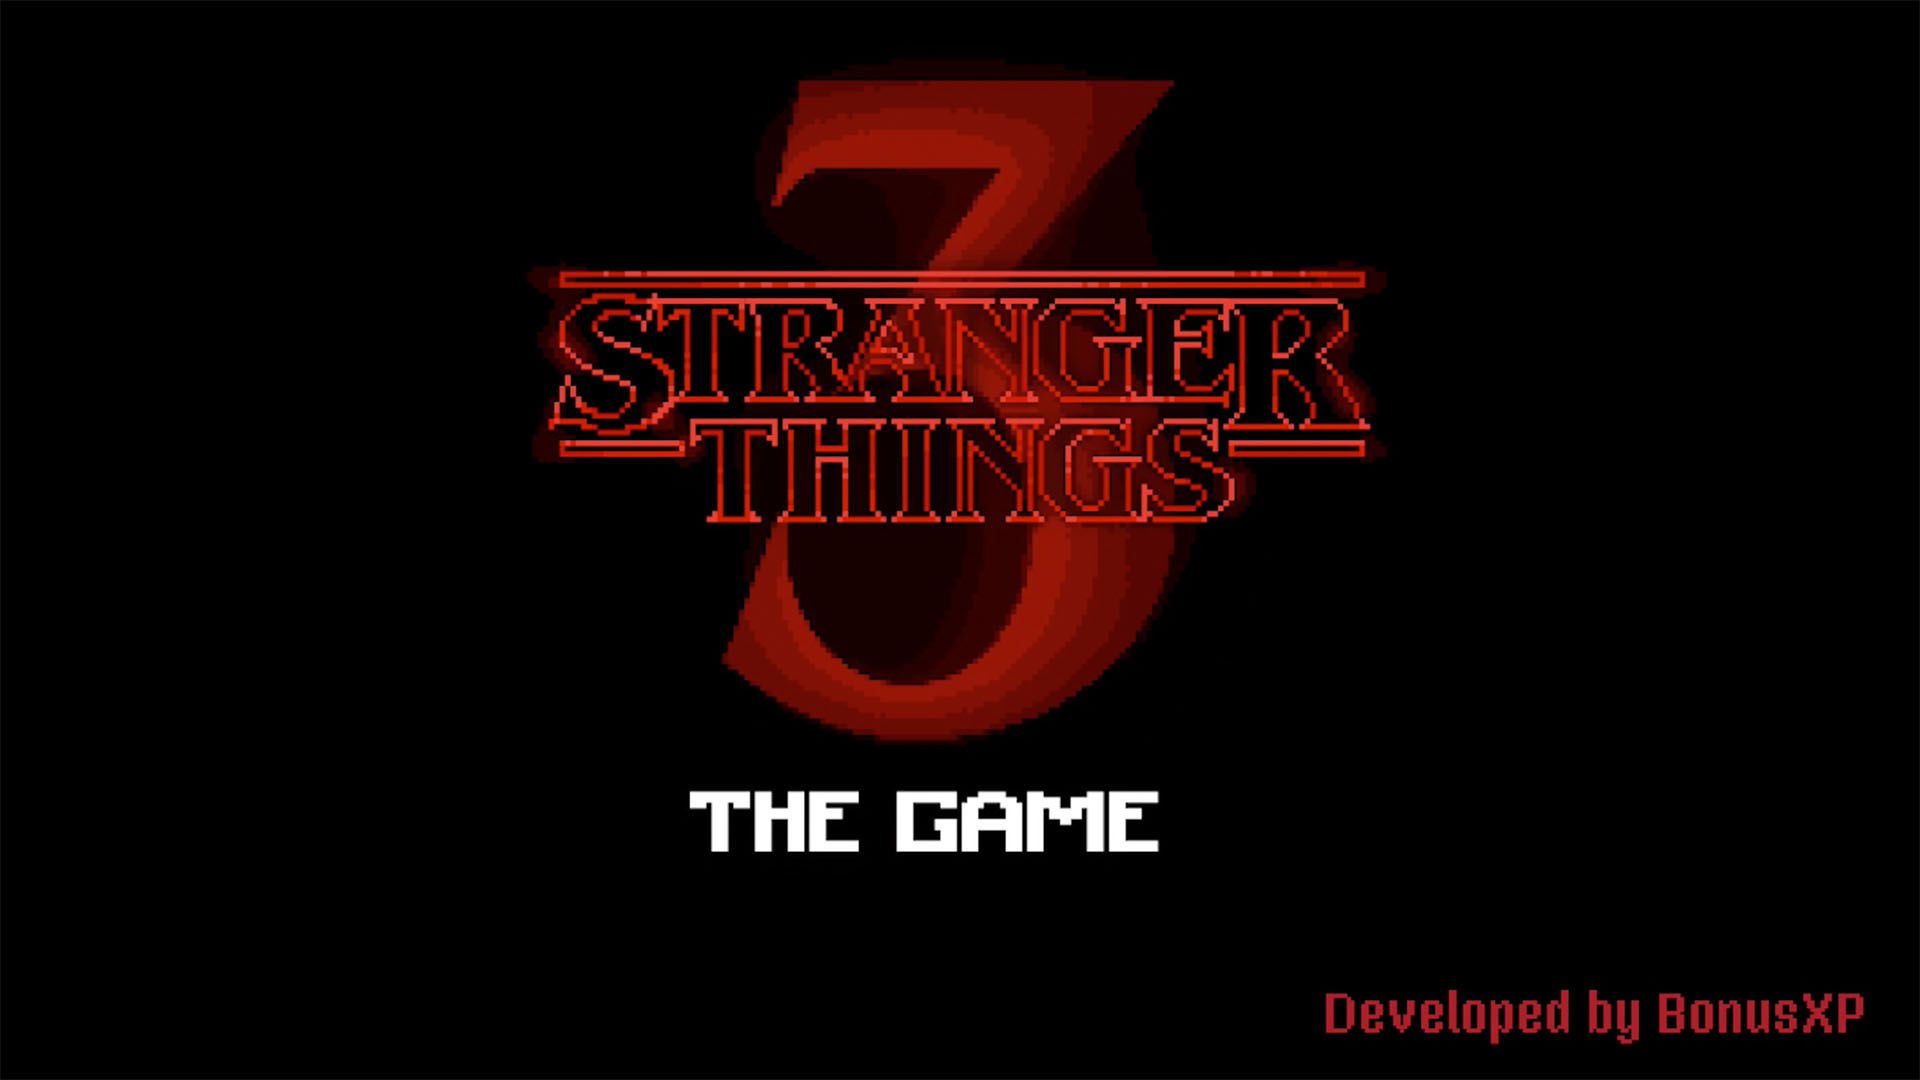 Stranger Things Season 3 The Game coming to Nintendo Switch to July 4th